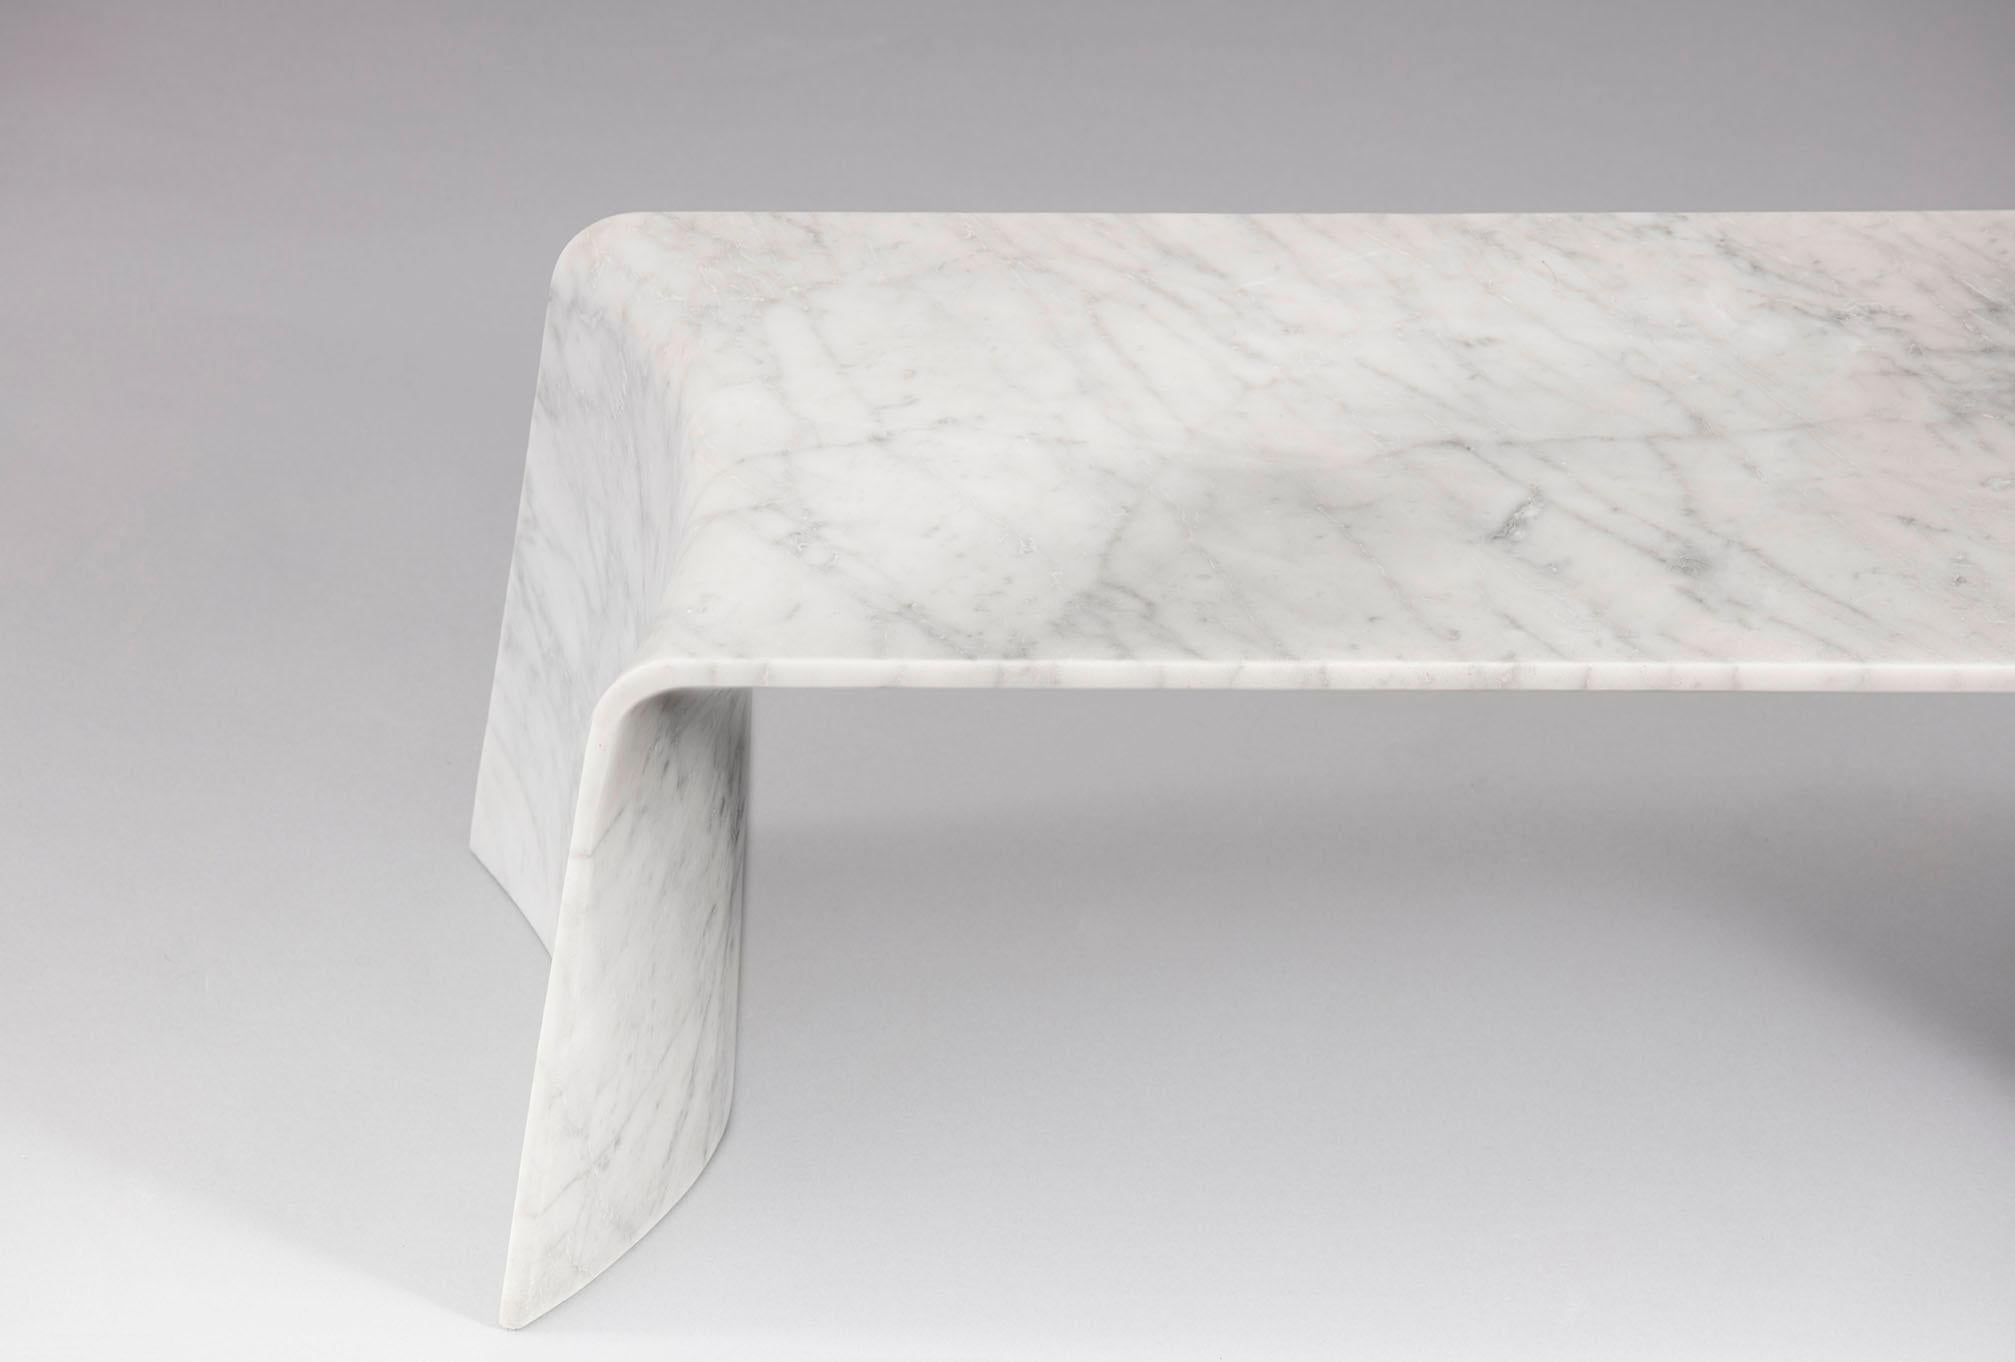 Carved Folio Rectangle Table in Carrara Marble by Daniel Fintzi for Formar For Sale